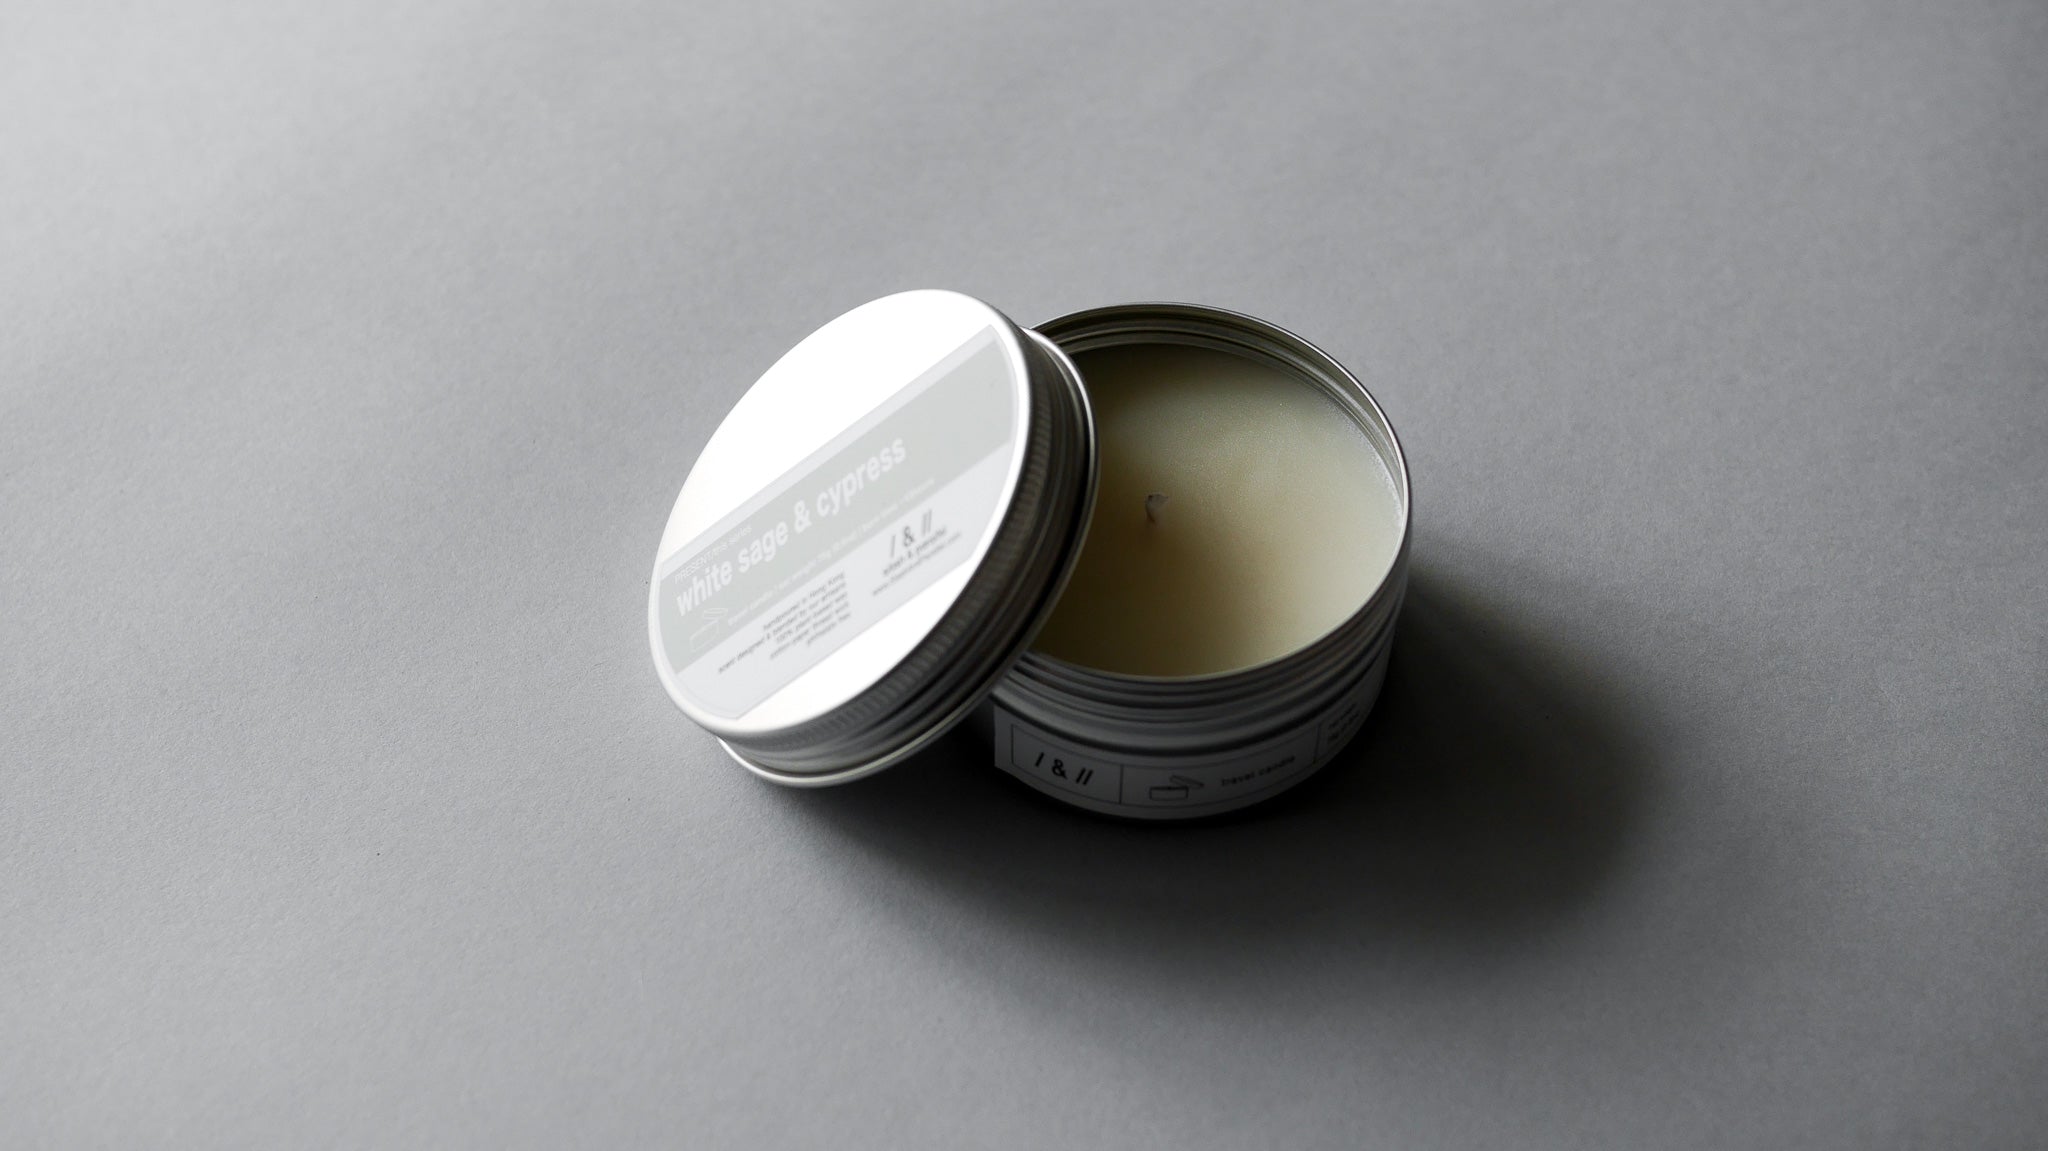 white sage & cypress / travel candle // this series